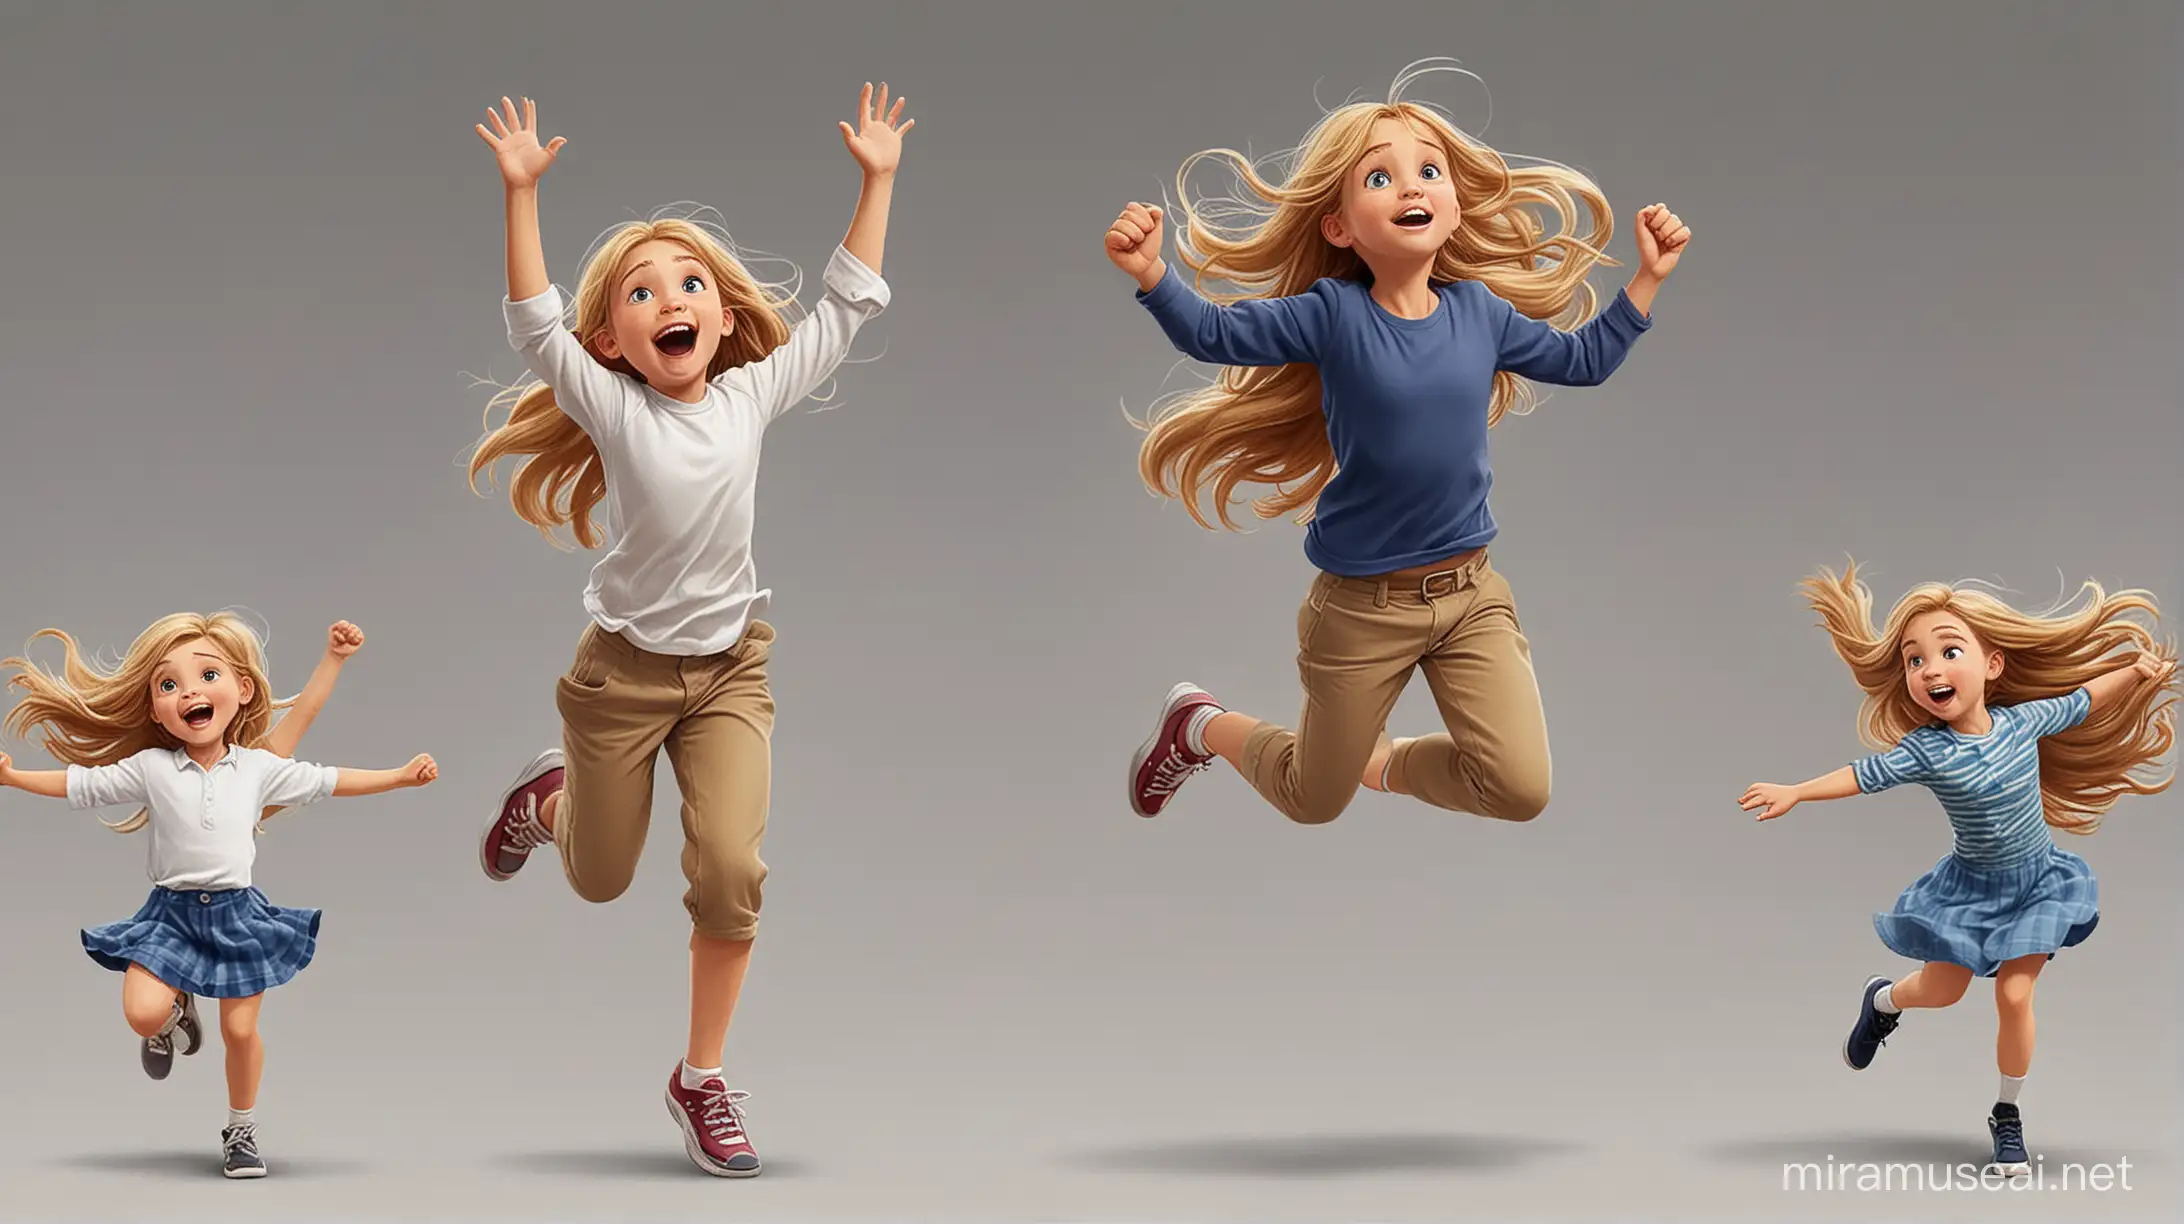 Dynamic Dark Blond Girl Running Dancing and Jumping in 2D Illustrations